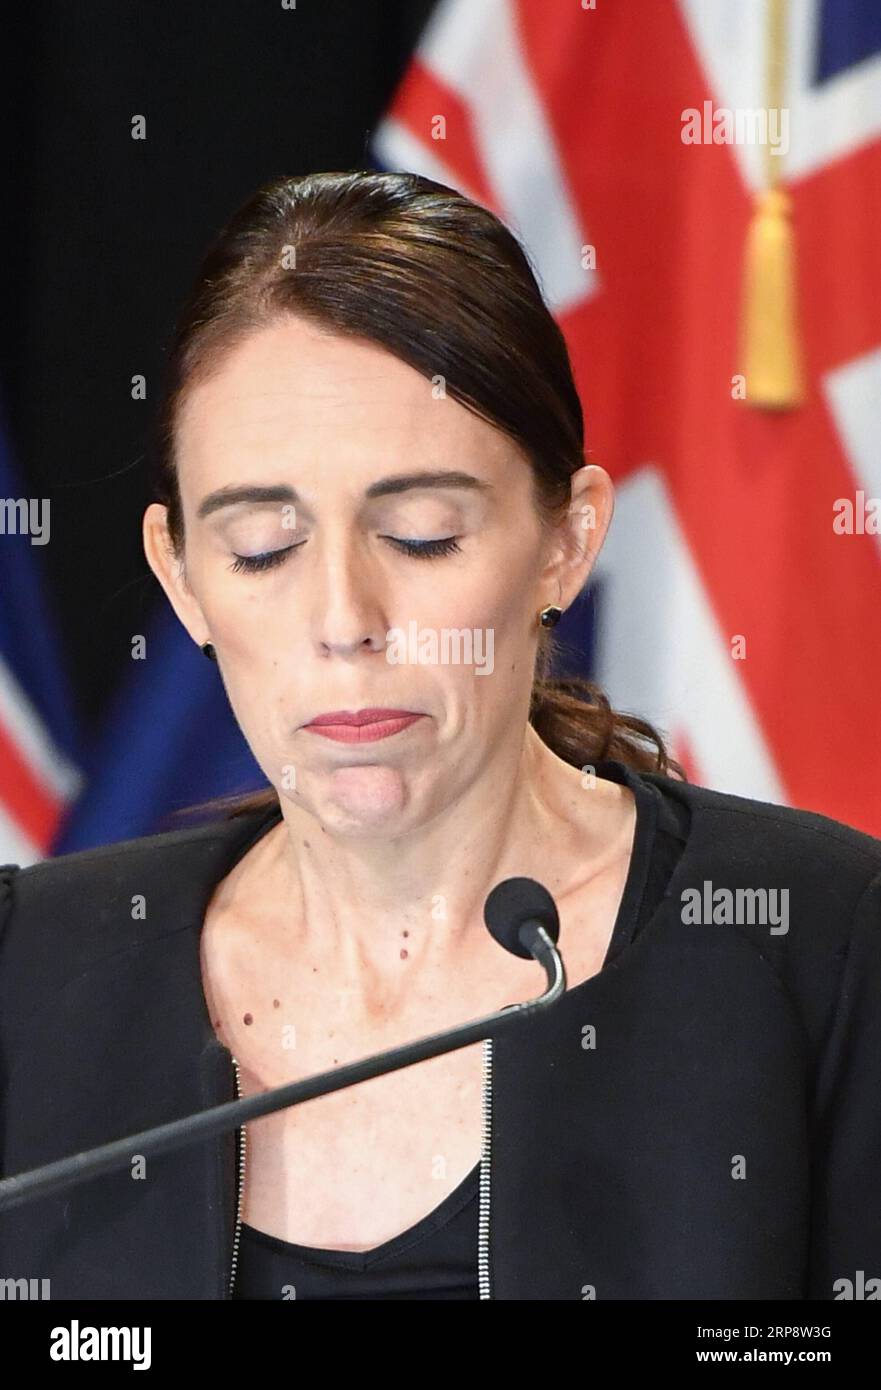 (190316) -- WELLINGTON, March 16, 2019 (Xinhua) -- New Zealand Prime Minister Jacinda Ardern reacts during a briefing in Wellington, capital of New Zealand, on March 16, 2019. Jacinda Ardern reiterated to the public on Saturday morning that the country s gun law will be changed. Gunmen opened fire in two separate mosques in Christchurch on Friday, killing 49 people and wounding 48 others. (Xinhua/Guo Lei) NEW ZEALAND-WELLINGTON-PM-CHRISTCHURCH-ATTACKS-BRIEFING PUBLICATIONxNOTxINxCHN Stock Photo